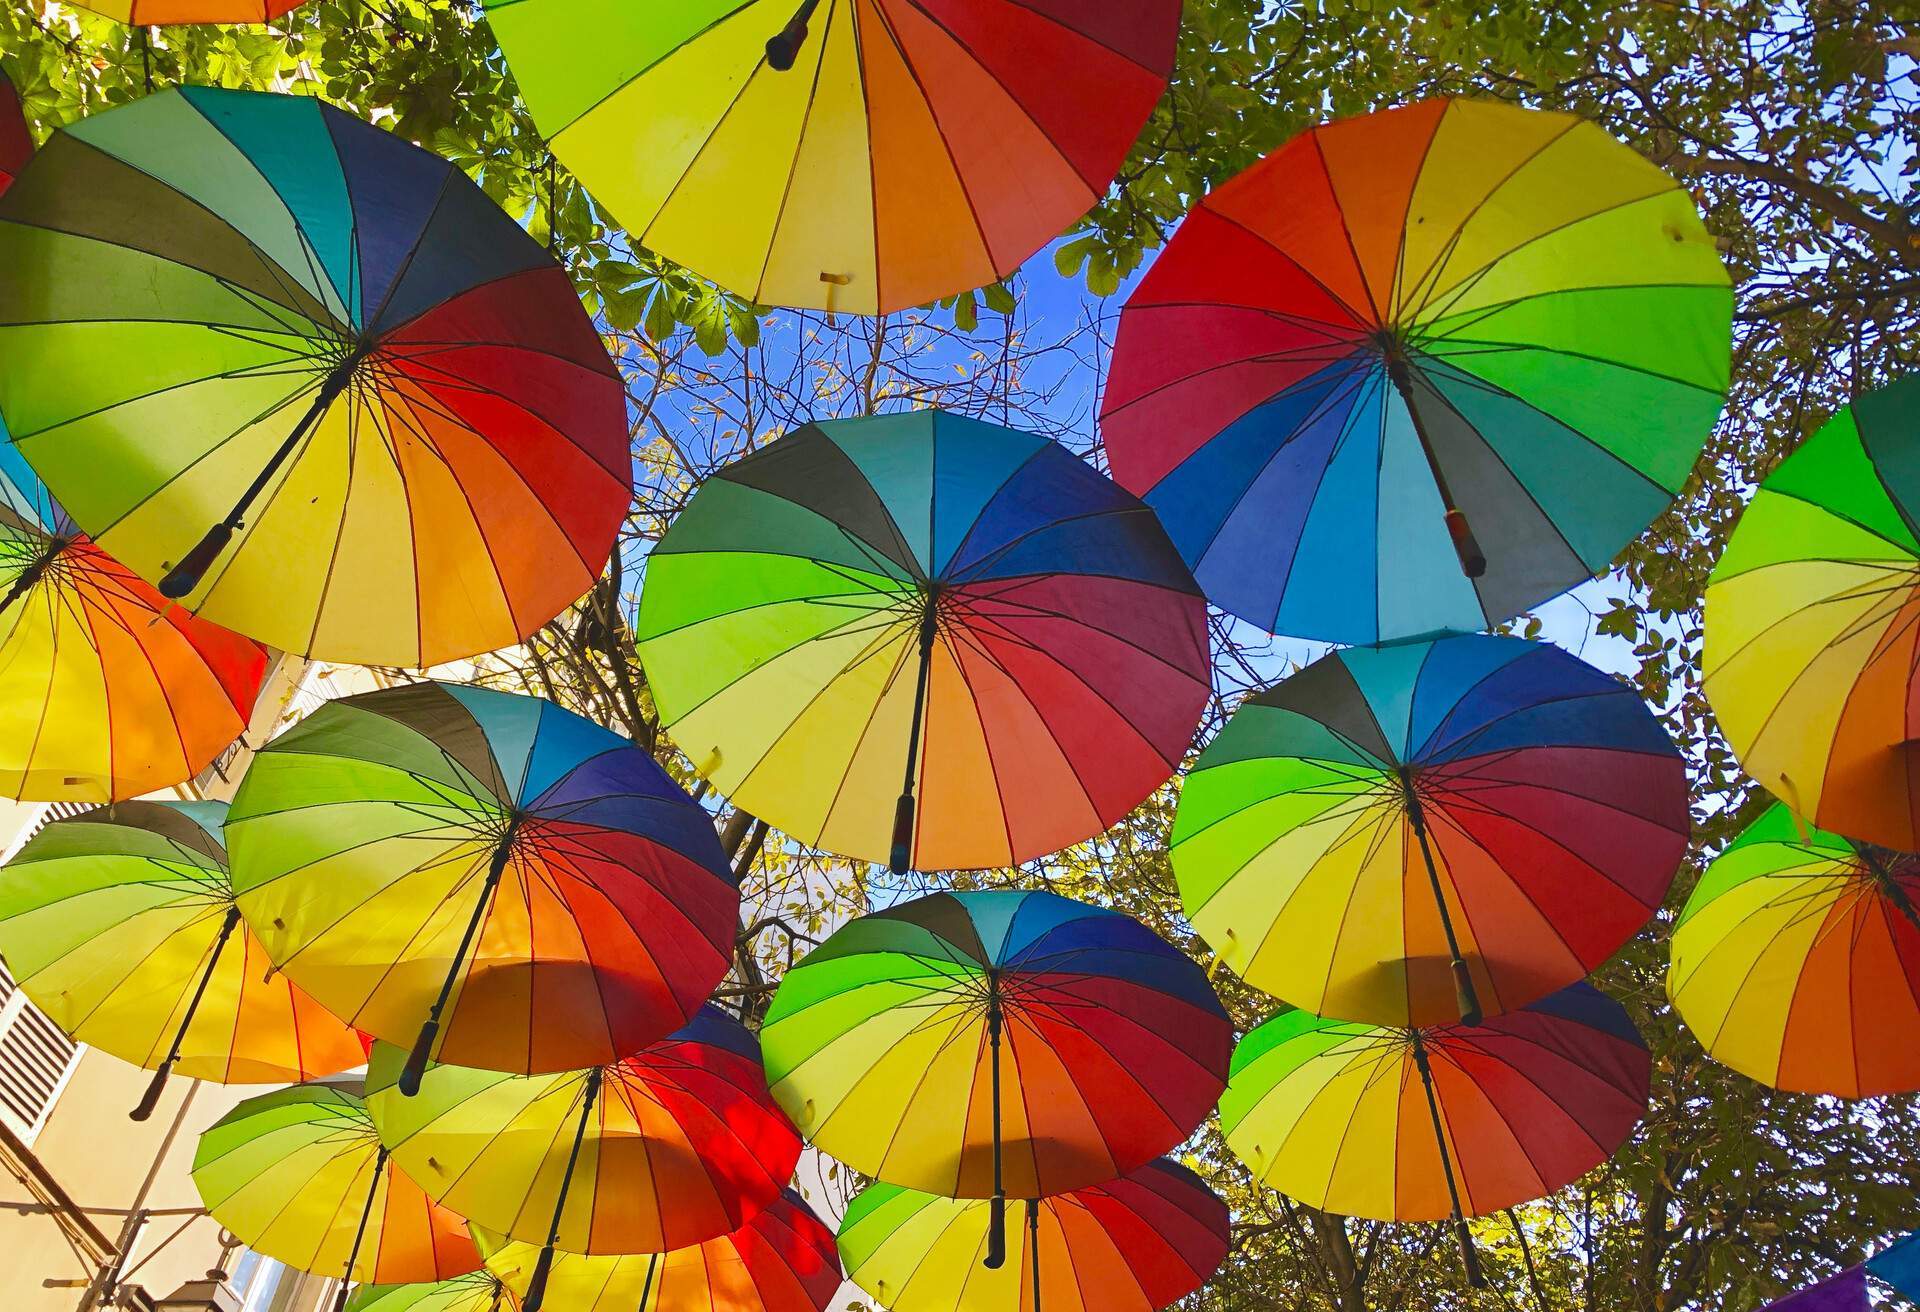 A cluster of rainbow umbrellas hanging amongst the trees.